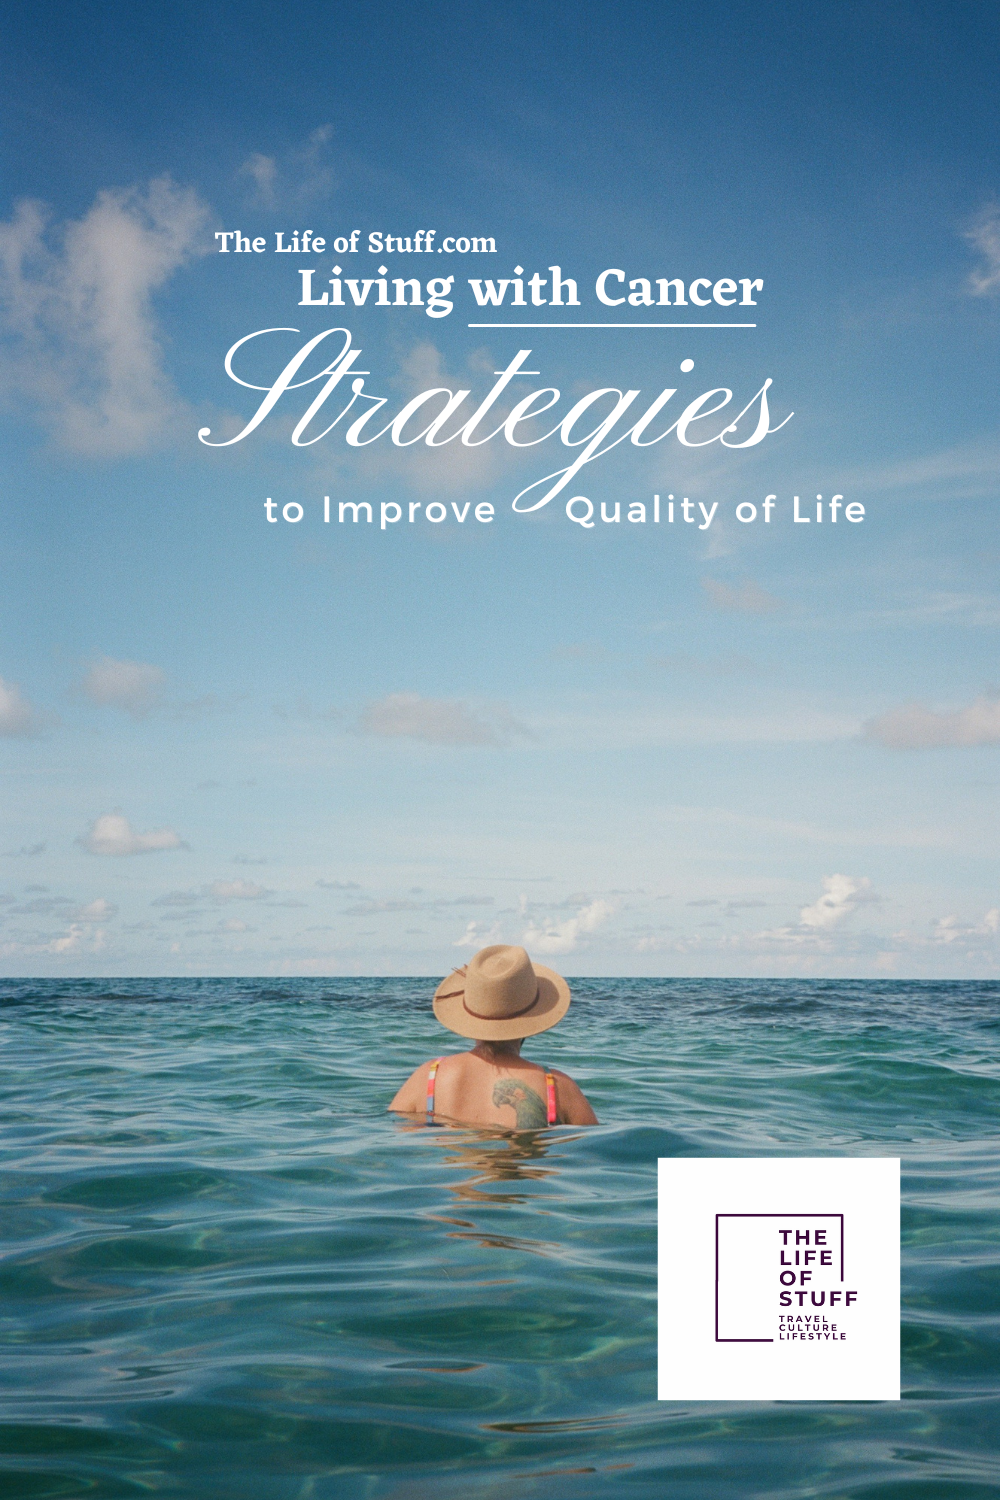 Living with Cancer - Strategies to Improve Quality of Life - The Life of Stuff